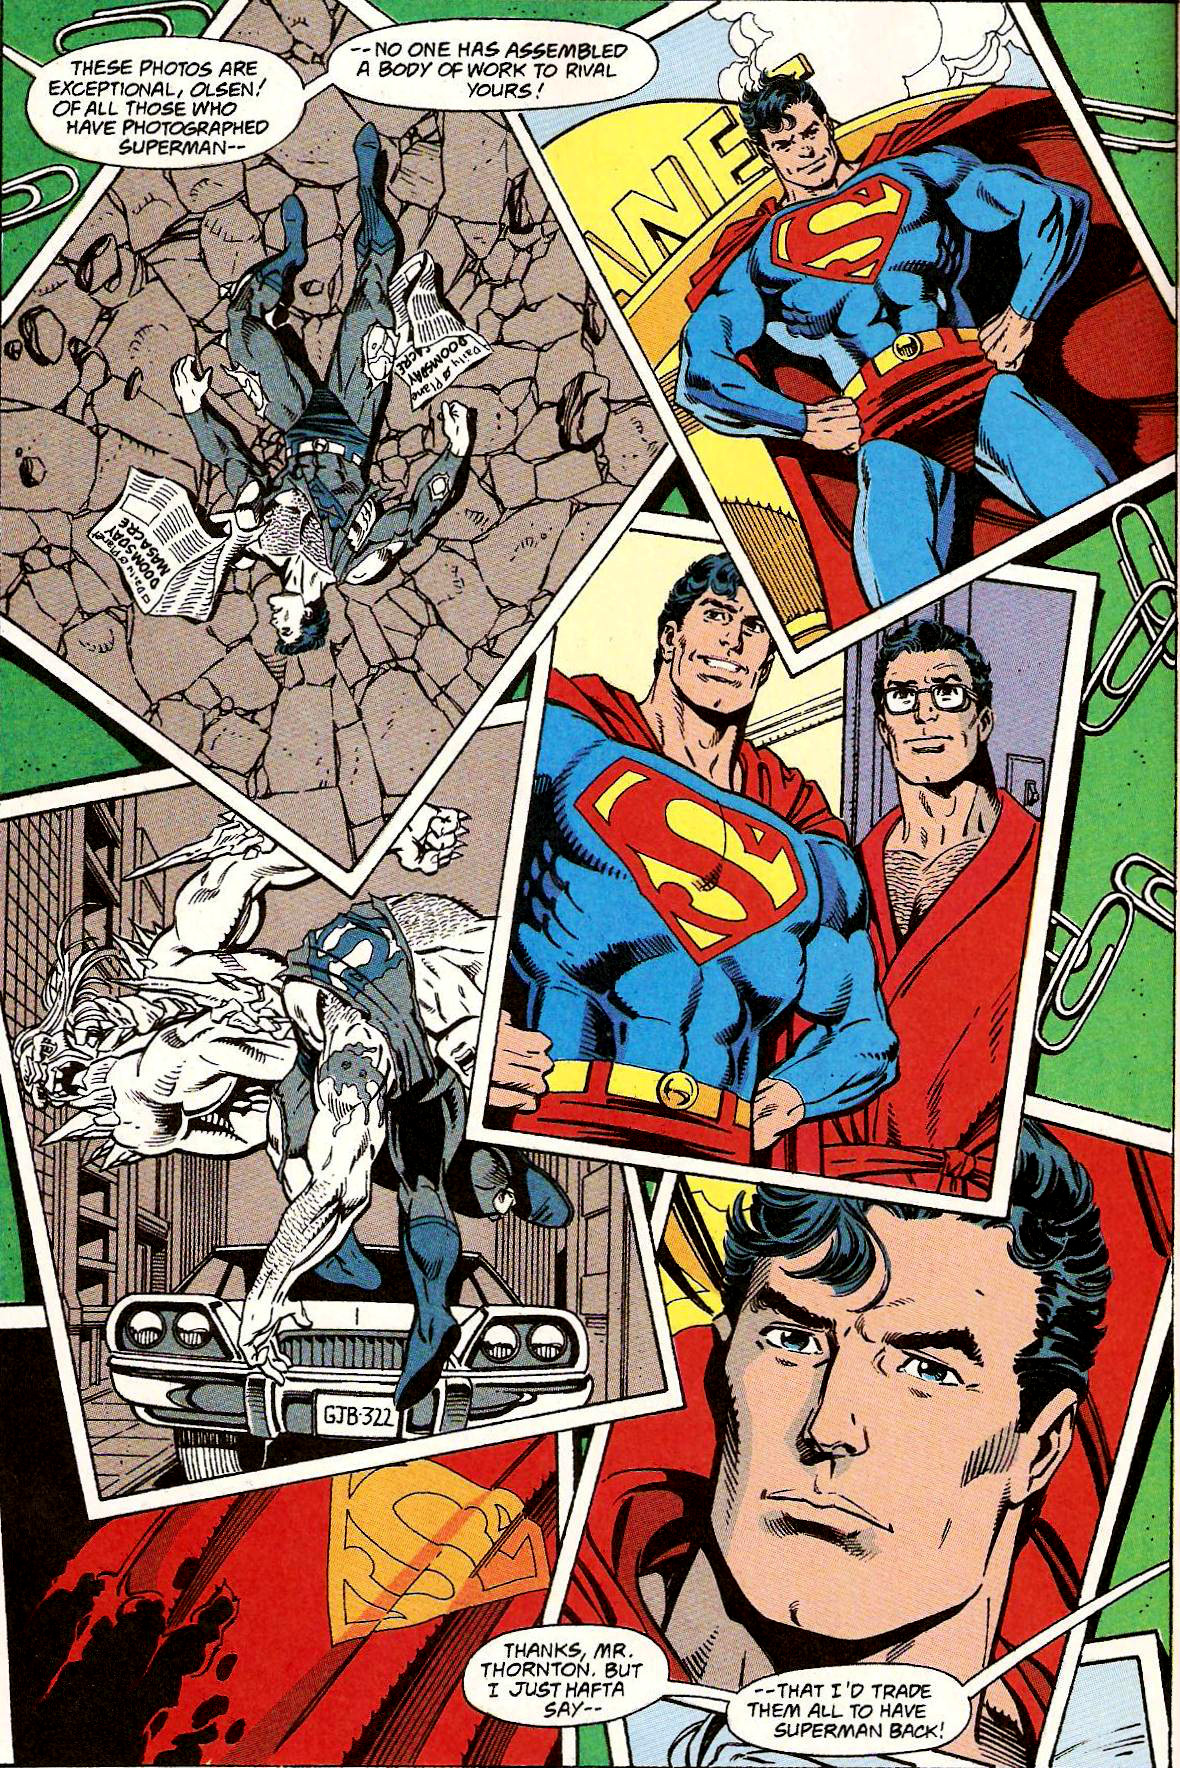 From Superman (Vol. 2) #77 (1993)